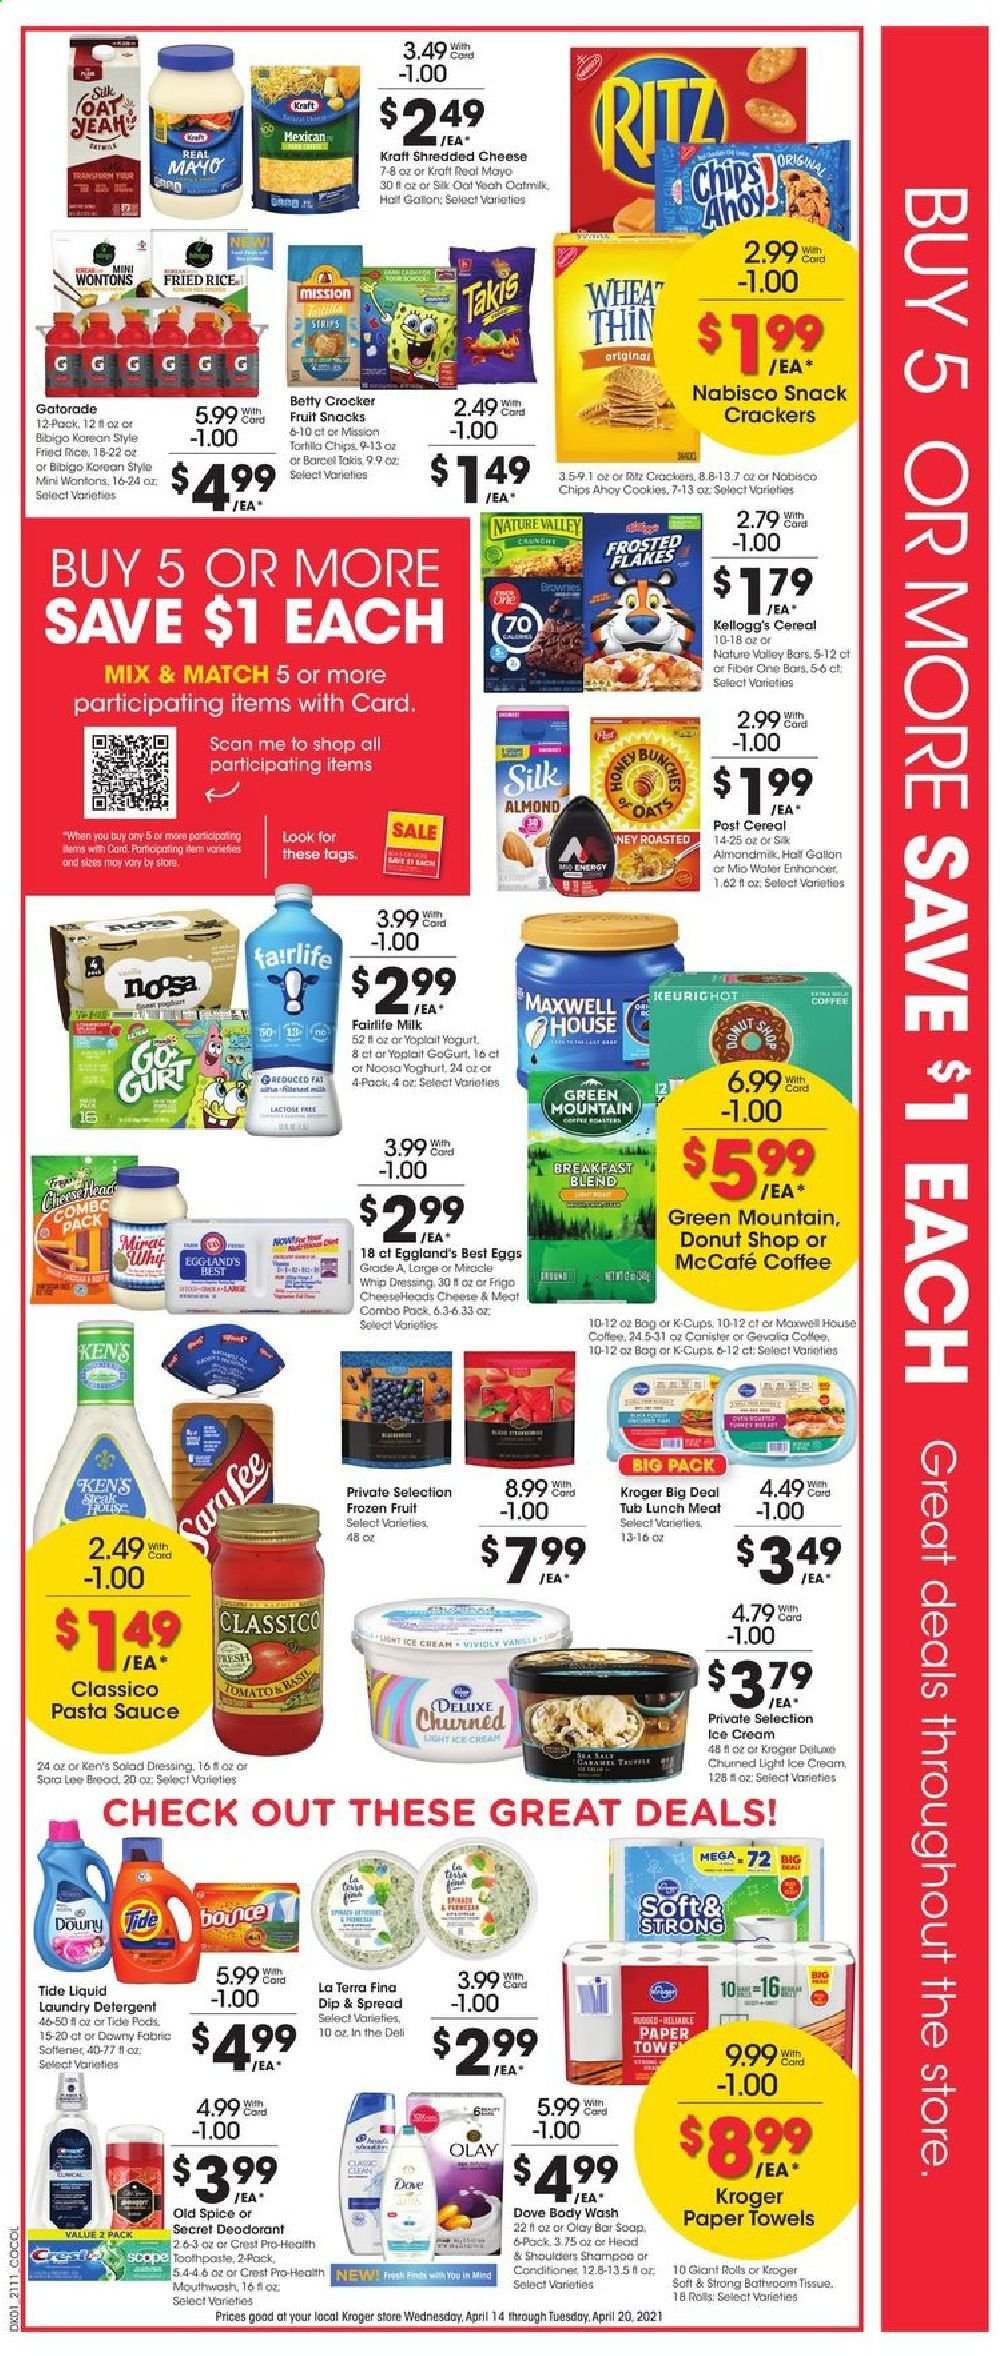 thumbnail - Kroger Flyer - 04/14/2021 - 04/20/2021 - Sales products - pasta sauce, sauce, Kraft®, lunch meat, shredded cheese, yoghurt, Yoplait, milk, Silk, oat milk, eggs, mayonnaise, Miracle Whip, crackers, Kellogg's, fruit snack, RITZ, oats, sea salt, cereals, Frosted Flakes, Nature Valley, Fiber One, rice, spice, dressing, Classico, Gatorade, Maxwell House, coffee, coffee capsules, McCafe, K-Cups, Gevalia, breakfast blend, Green Mountain, Dove, bath tissue, tissues, kitchen towels, paper towels, detergent, Tide, laundry detergent, Bounce, Downy Laundry, body wash, shampoo, Old Spice, toothpaste, mouthwash, Crest, Olay, conditioner, Head & Shoulders, anti-perspirant, deodorant, mouse, coat, Lee. Page 2.